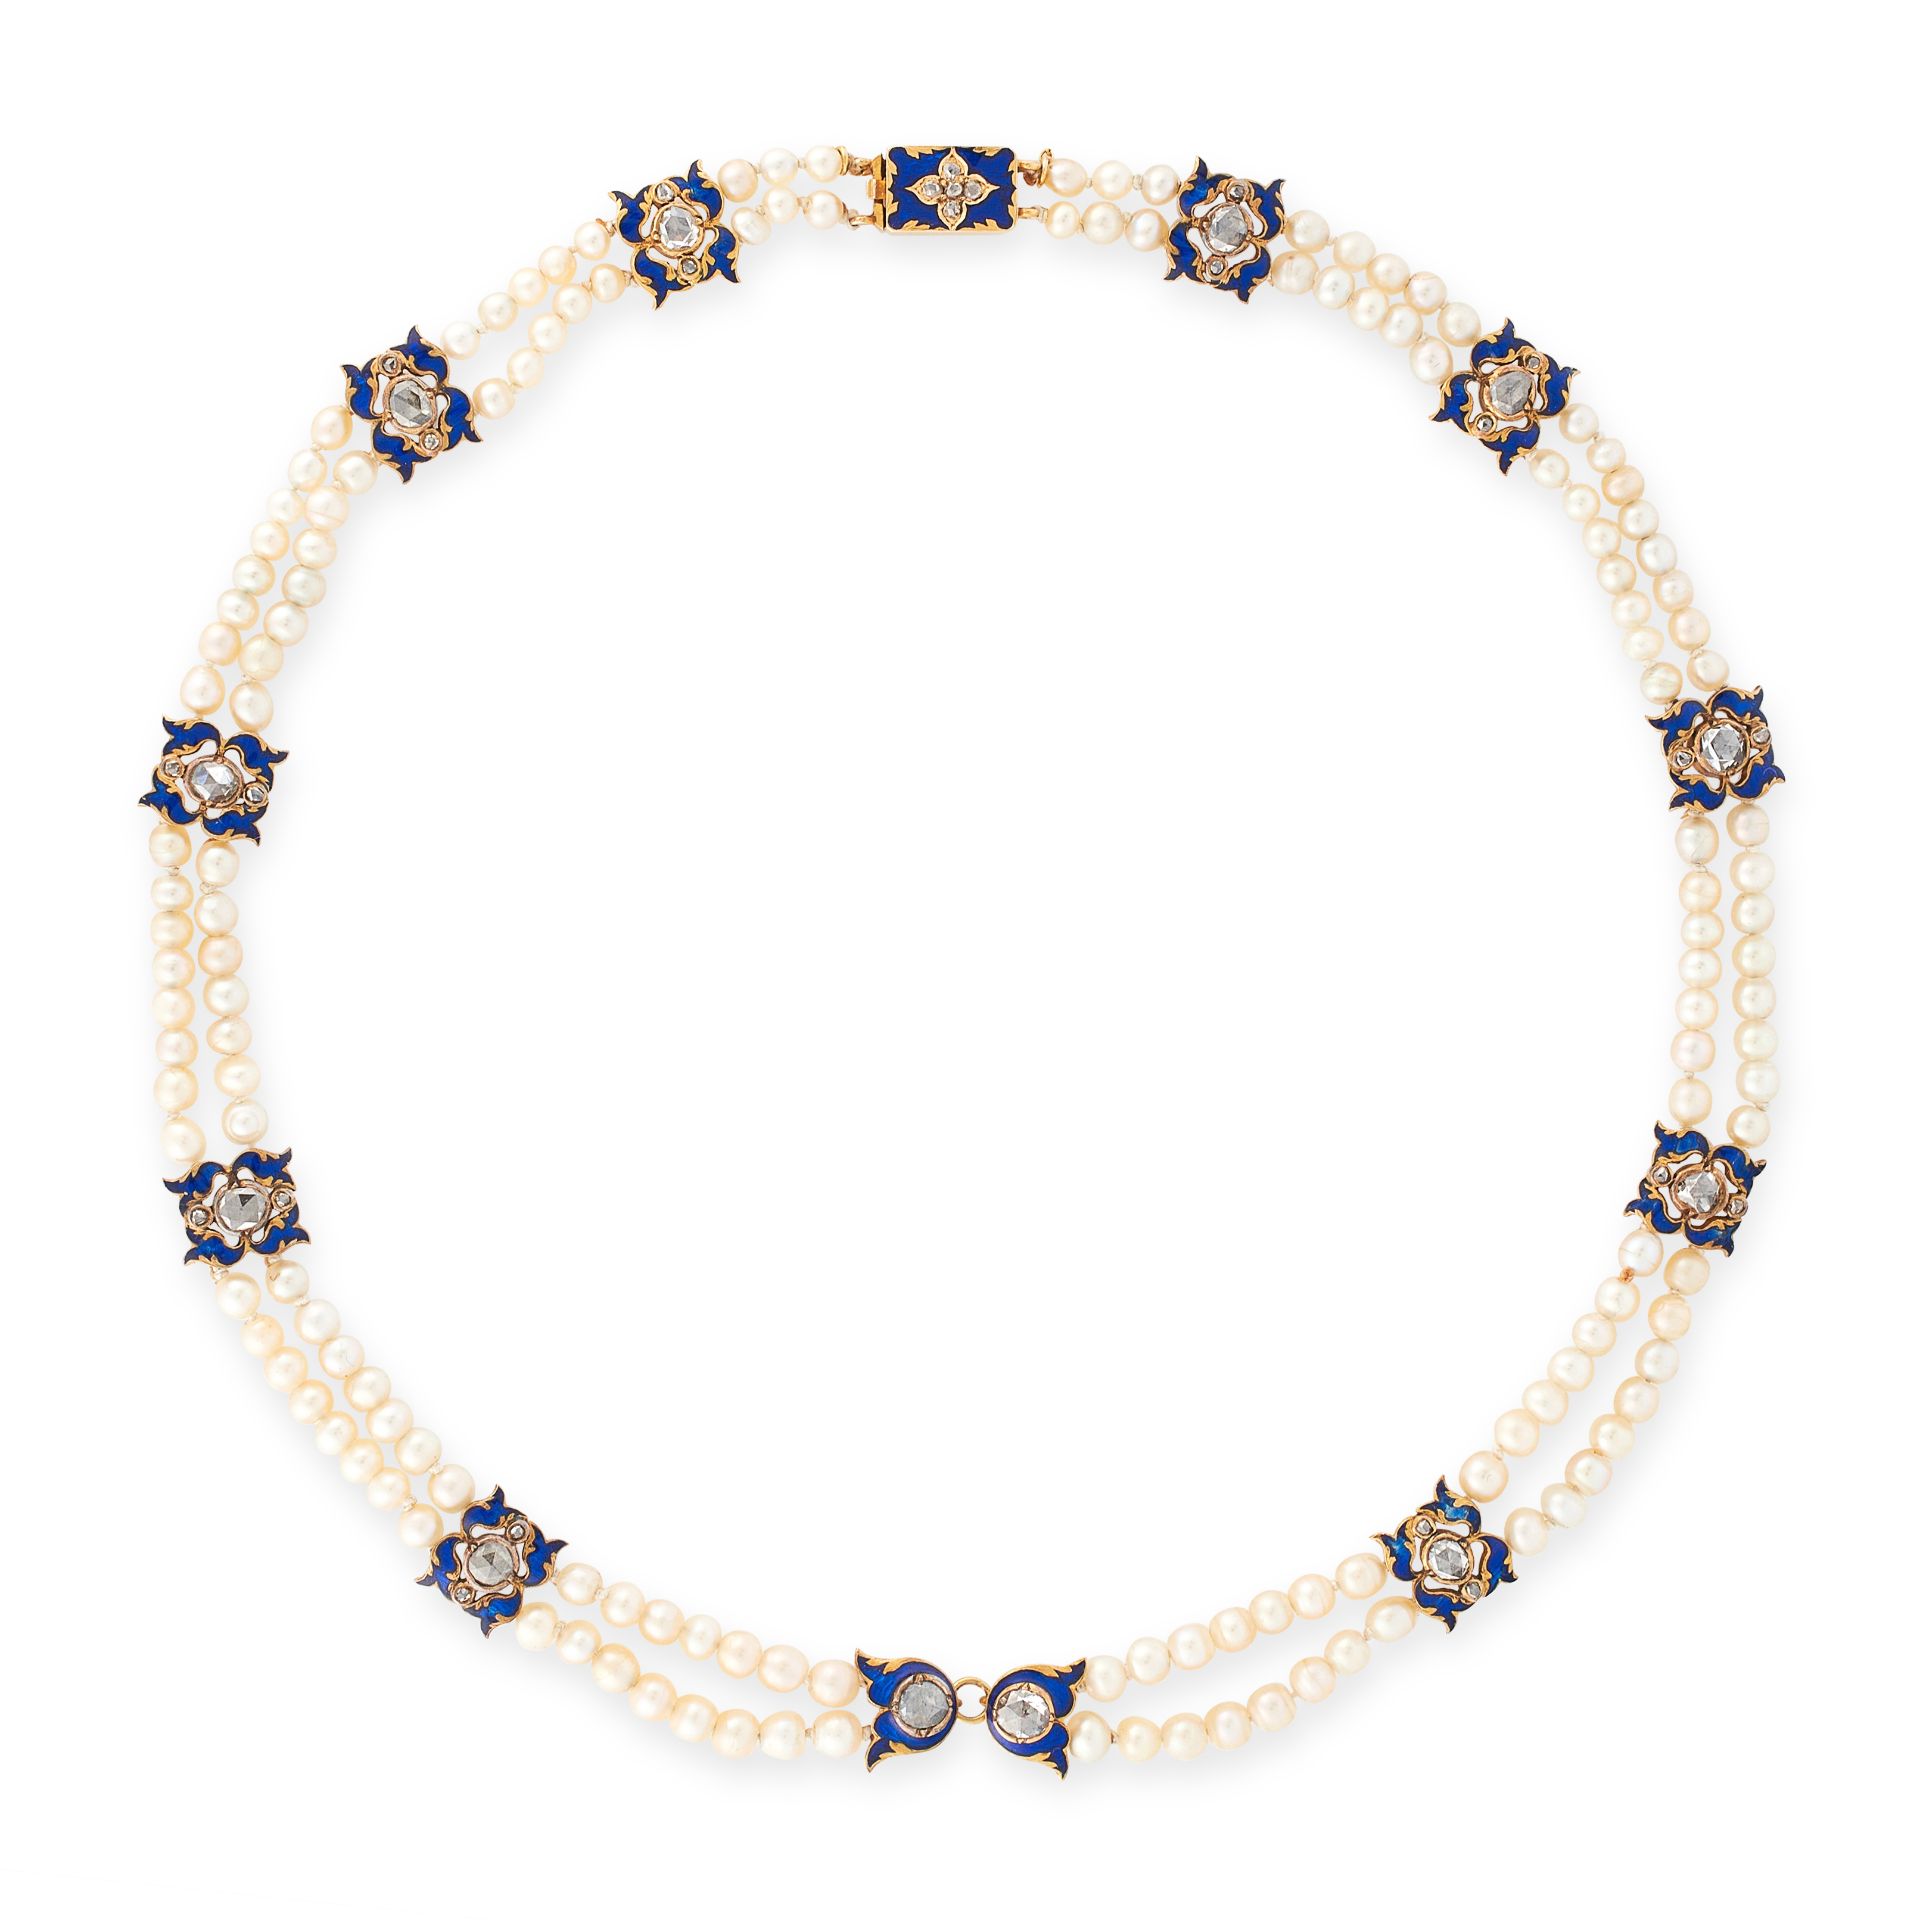 ANTIQUE NATURAL PEARL, ENAMEL AND DIAMOND NECKLACE, LATE 19TH CENTURY designed as a double row of